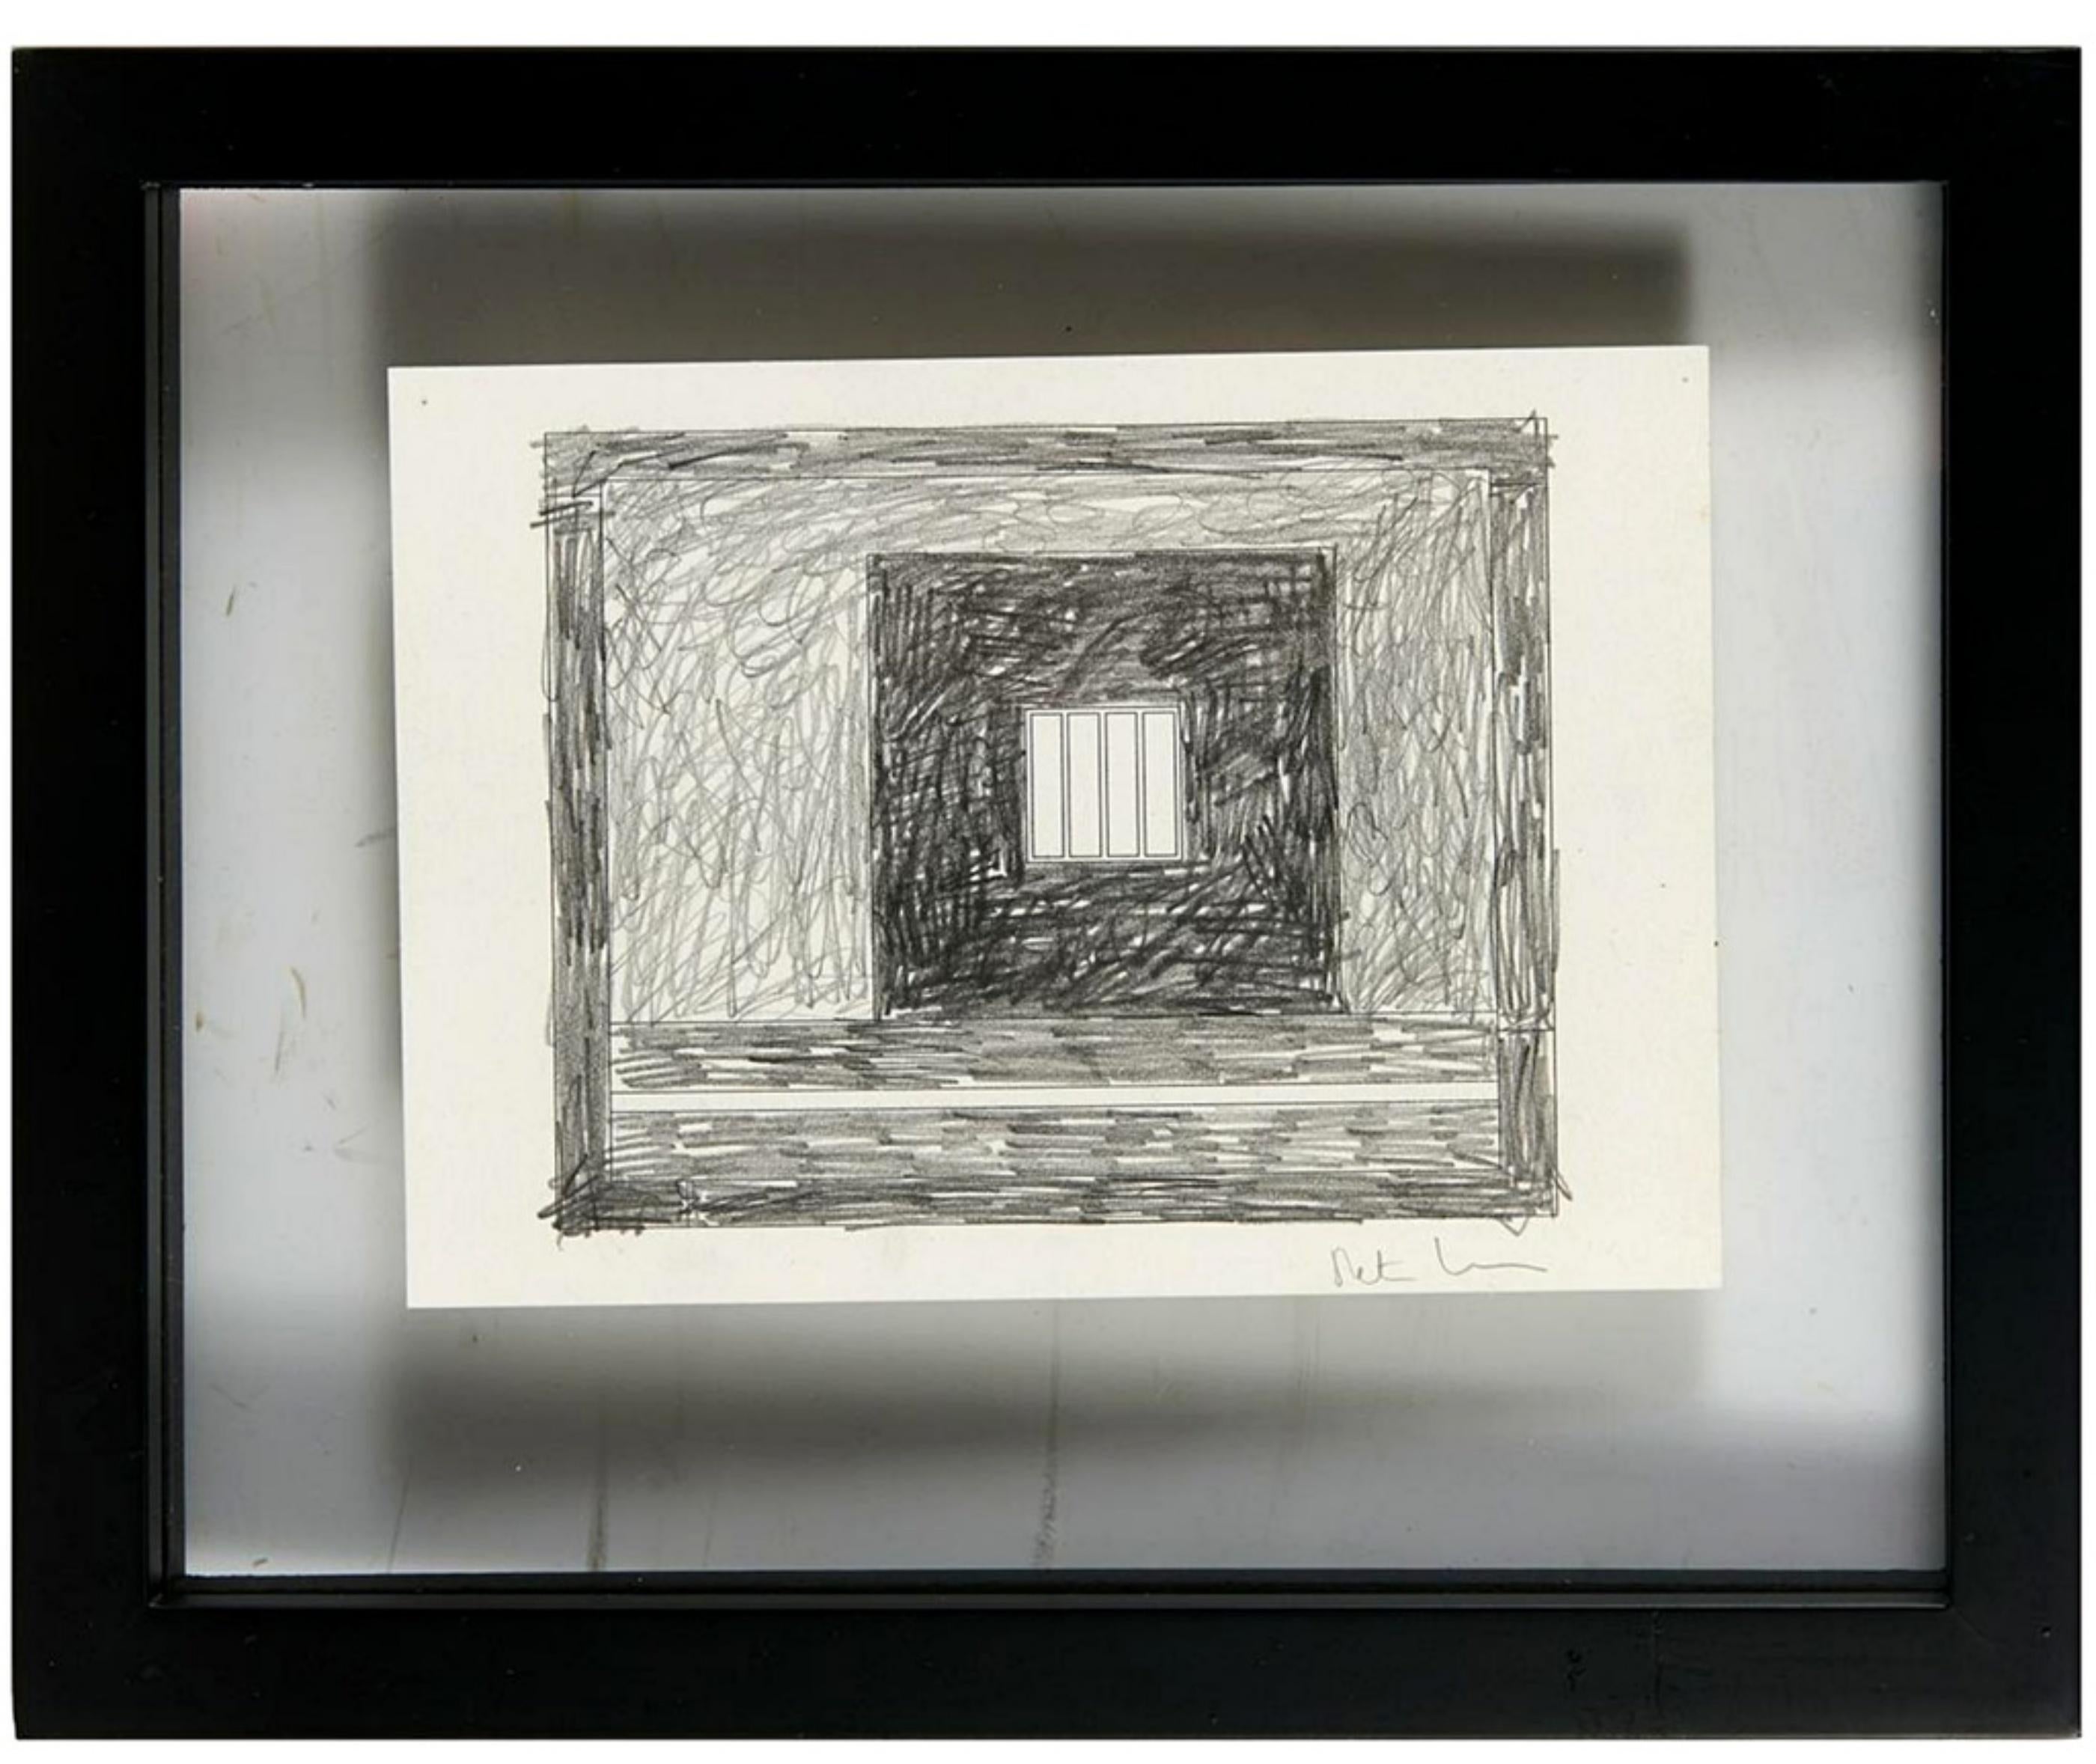 Peter Halley Abstract Drawing - Prison 30, unique signed drawing 1990s by renowned contemporary artist, framed